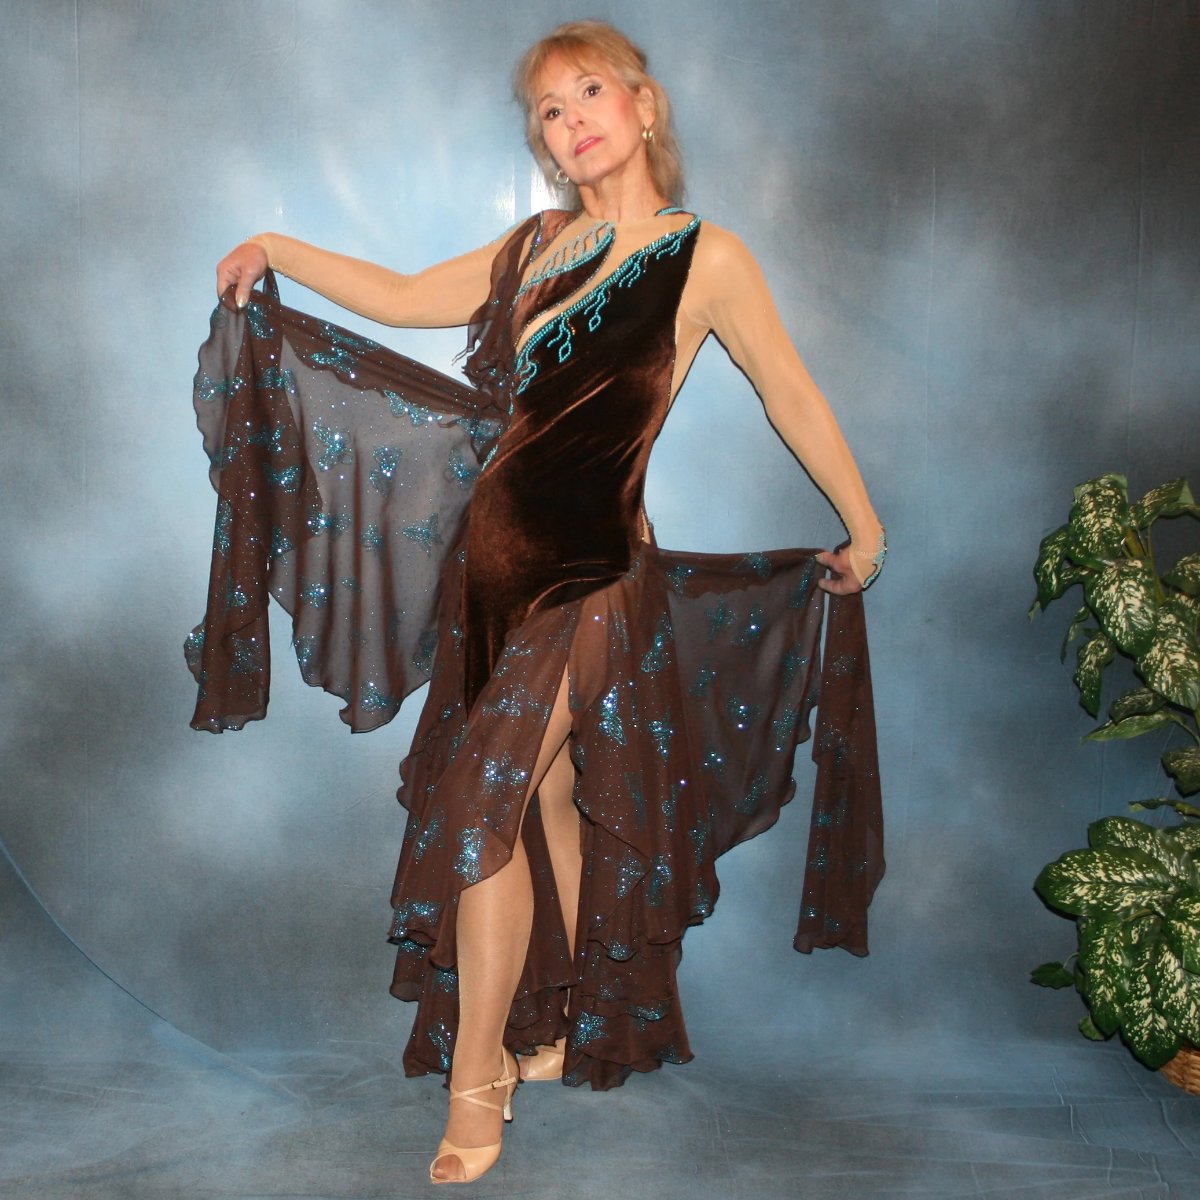 Crystal's Creations Exquisite brown ballroom dance dress with turquoise accents was created in luxurious chocolate brown stretch velvet on a nude illusion base…featuring billowing yards of brown chiffon petal panels with glittery turquoise butterflies. 